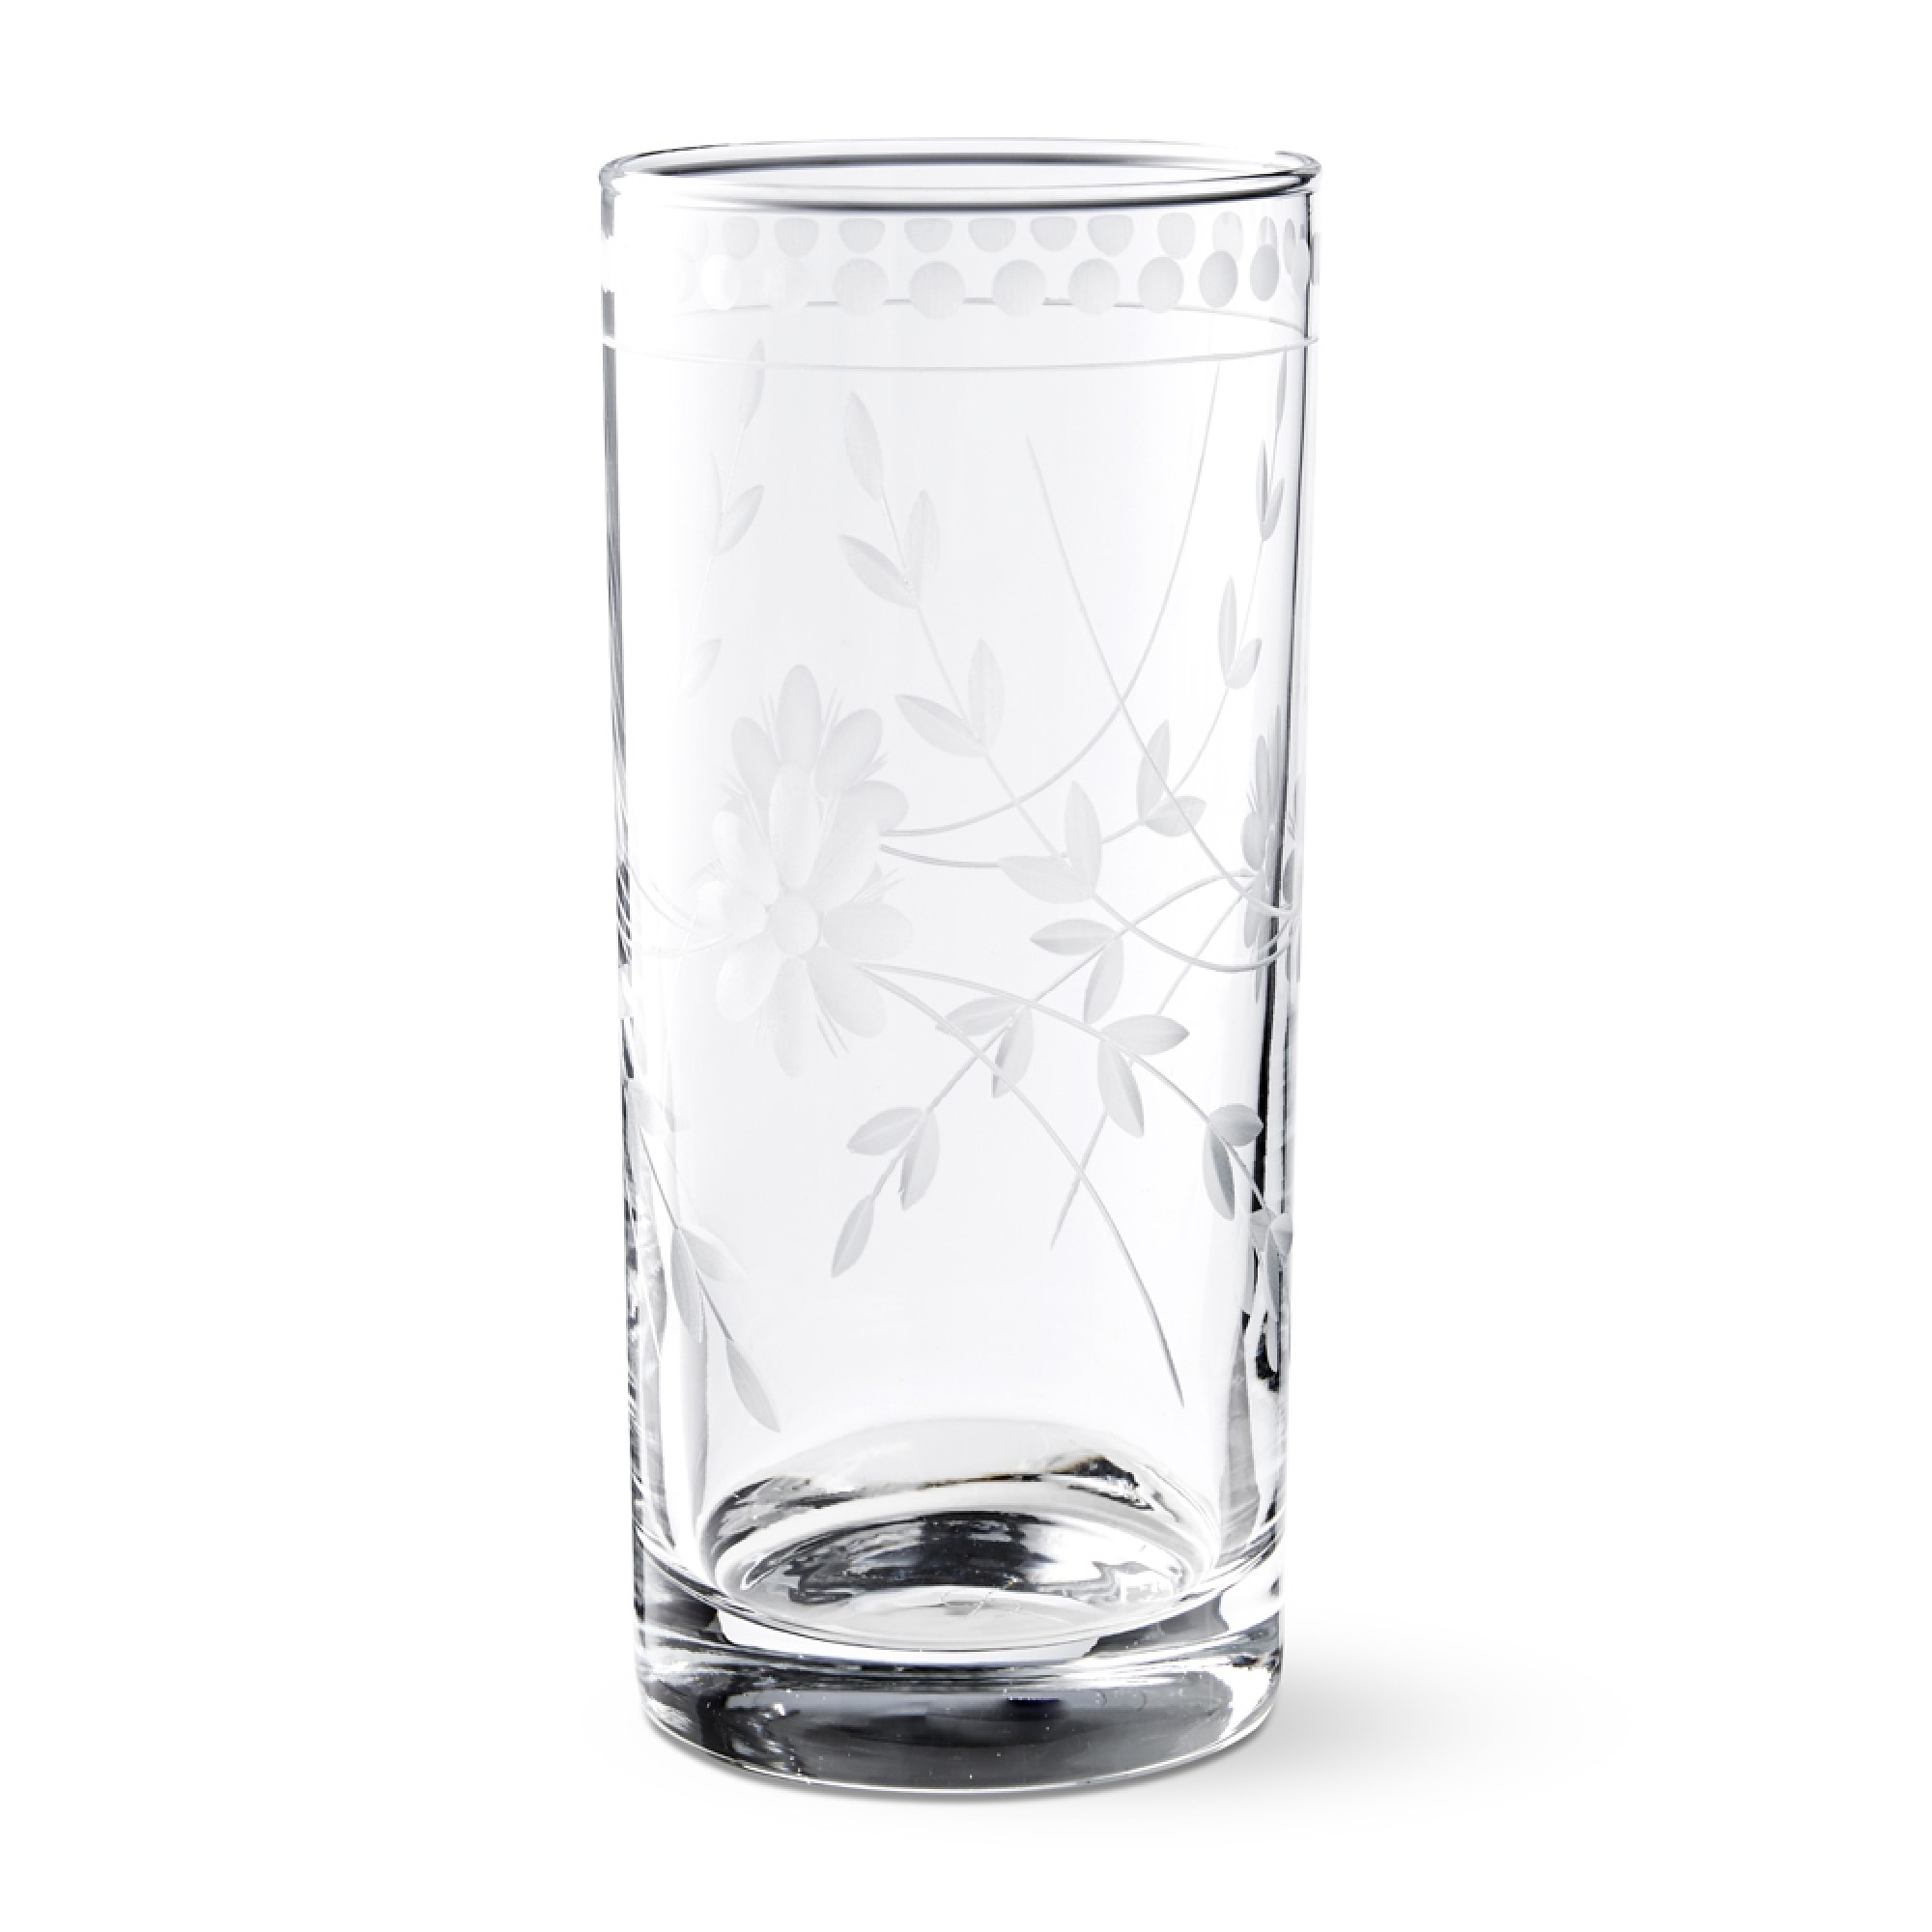 OPEN BOX: Vintage Etched Highball Glasses